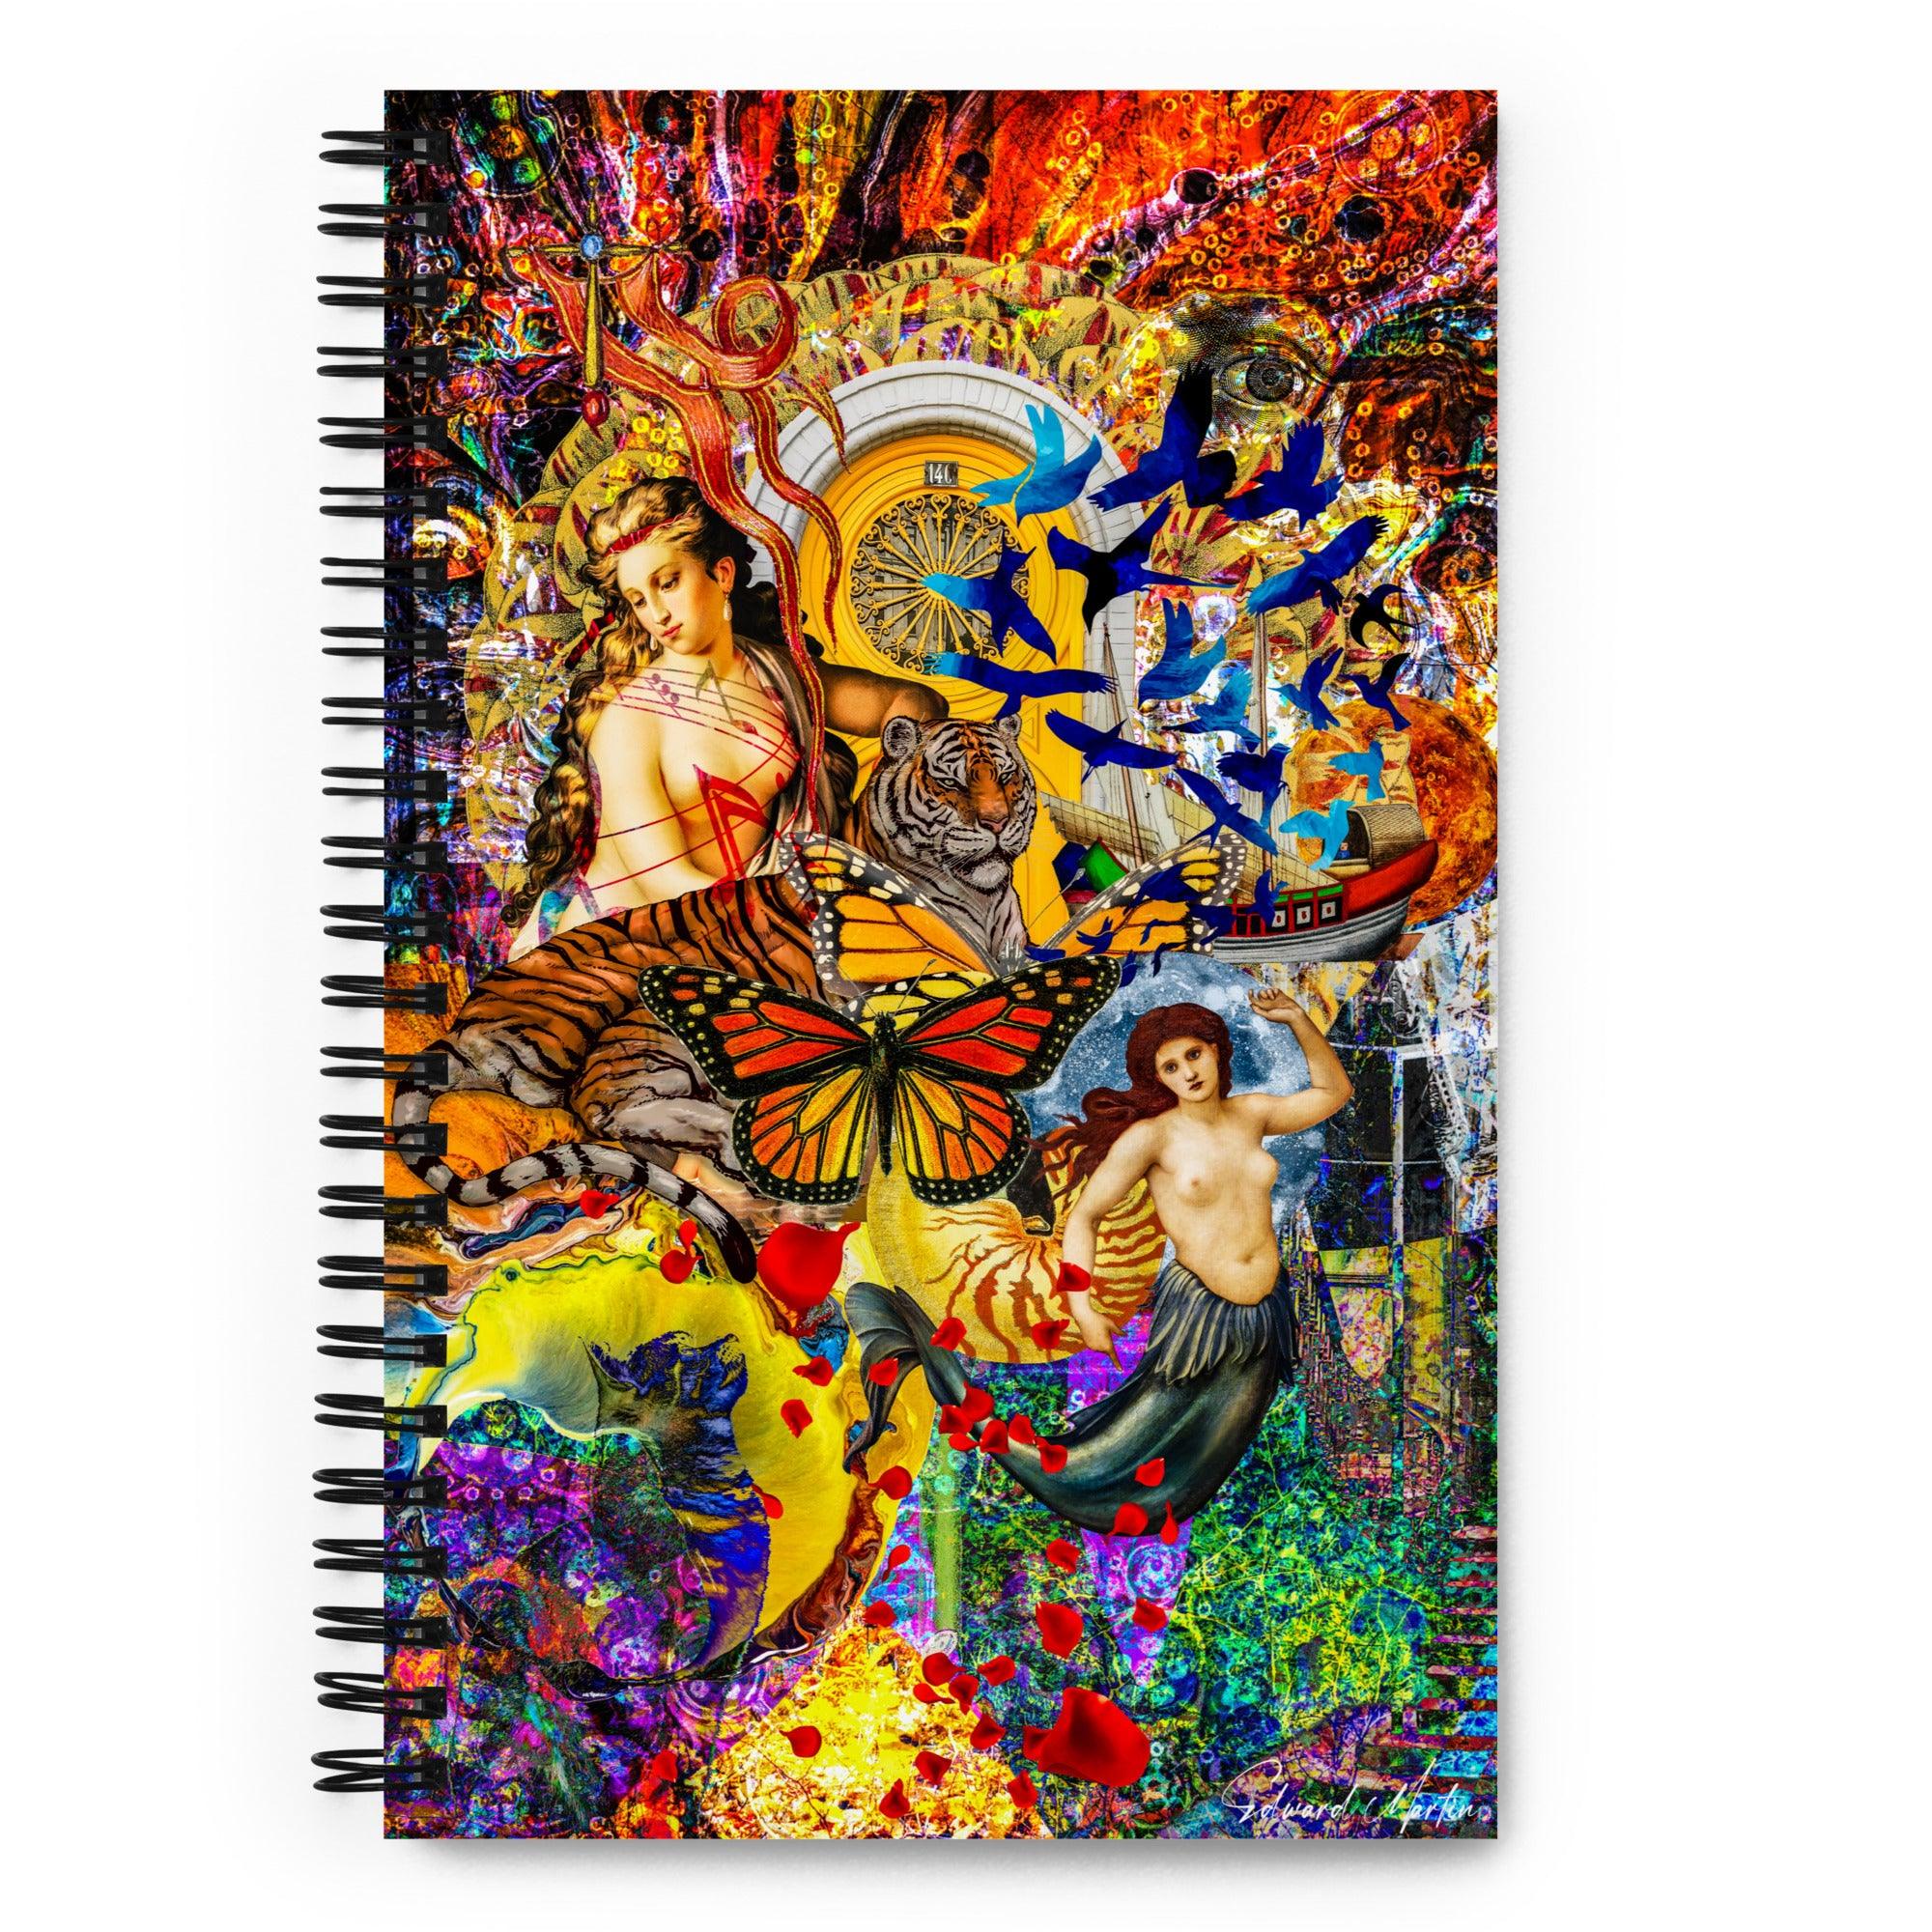 Spiral notebook-Dream In Colors by Edward Martin - Elementologie